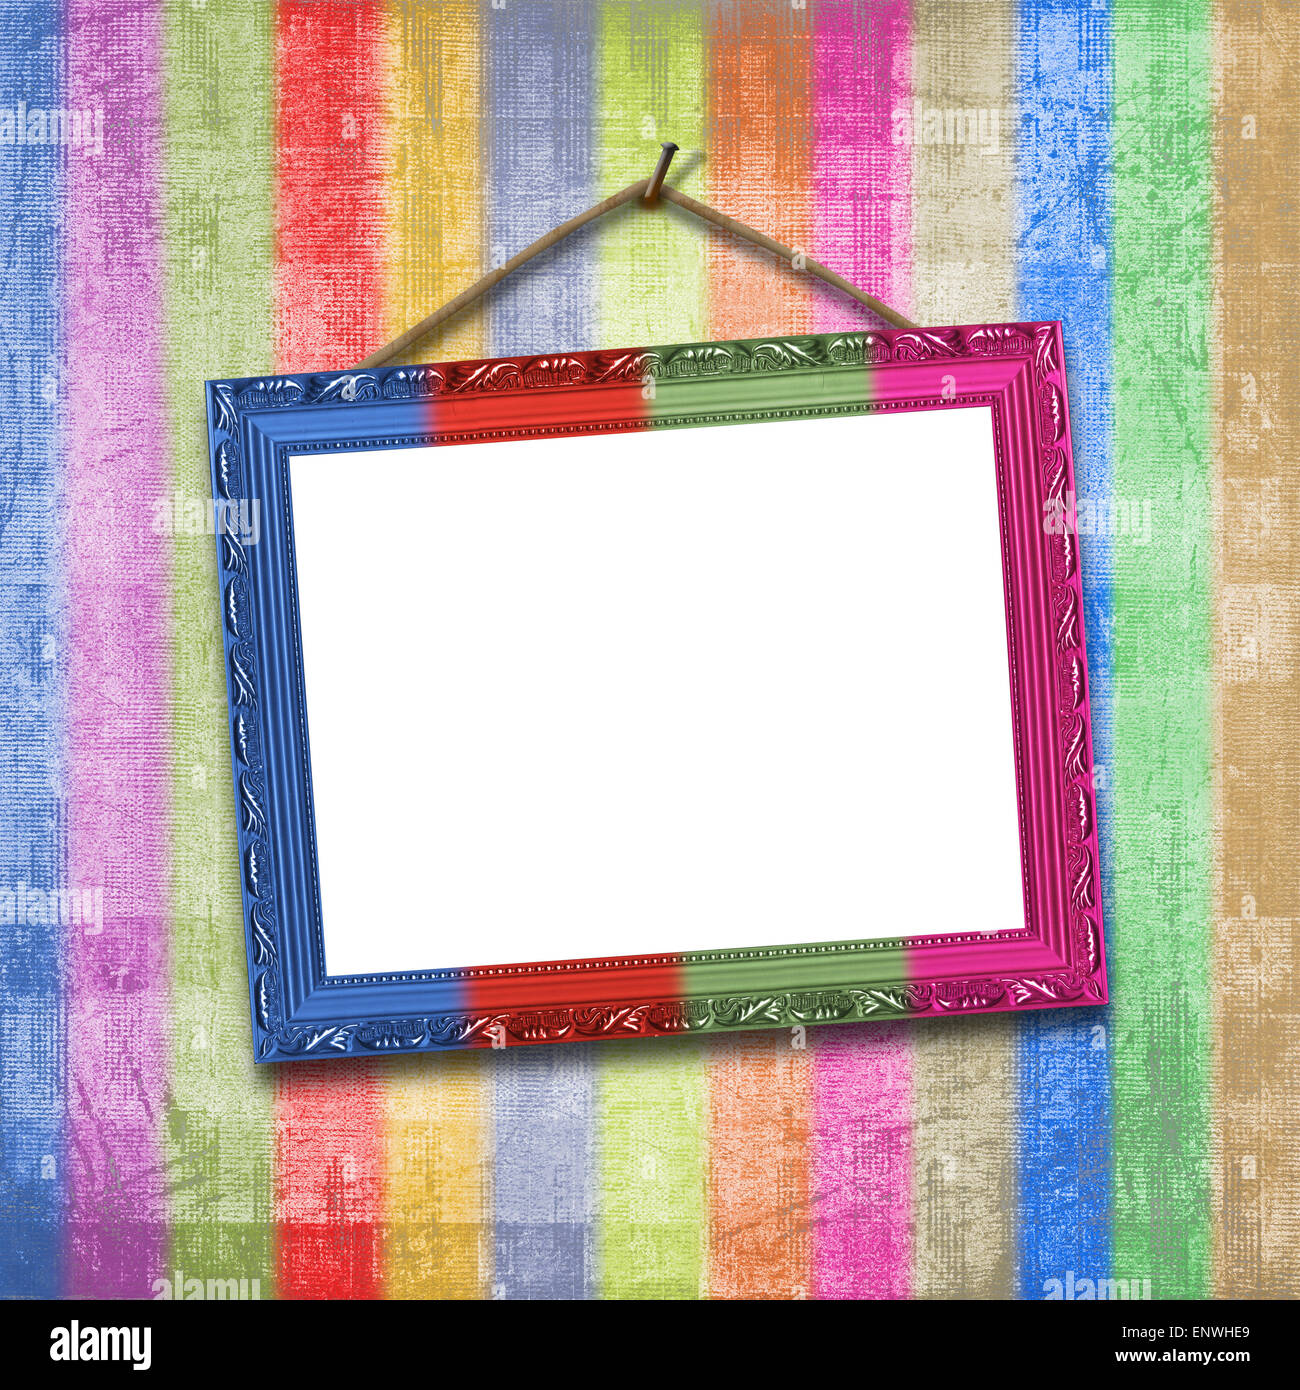 Wooden multicolored framework for portraiture on the striped background Stock Photo